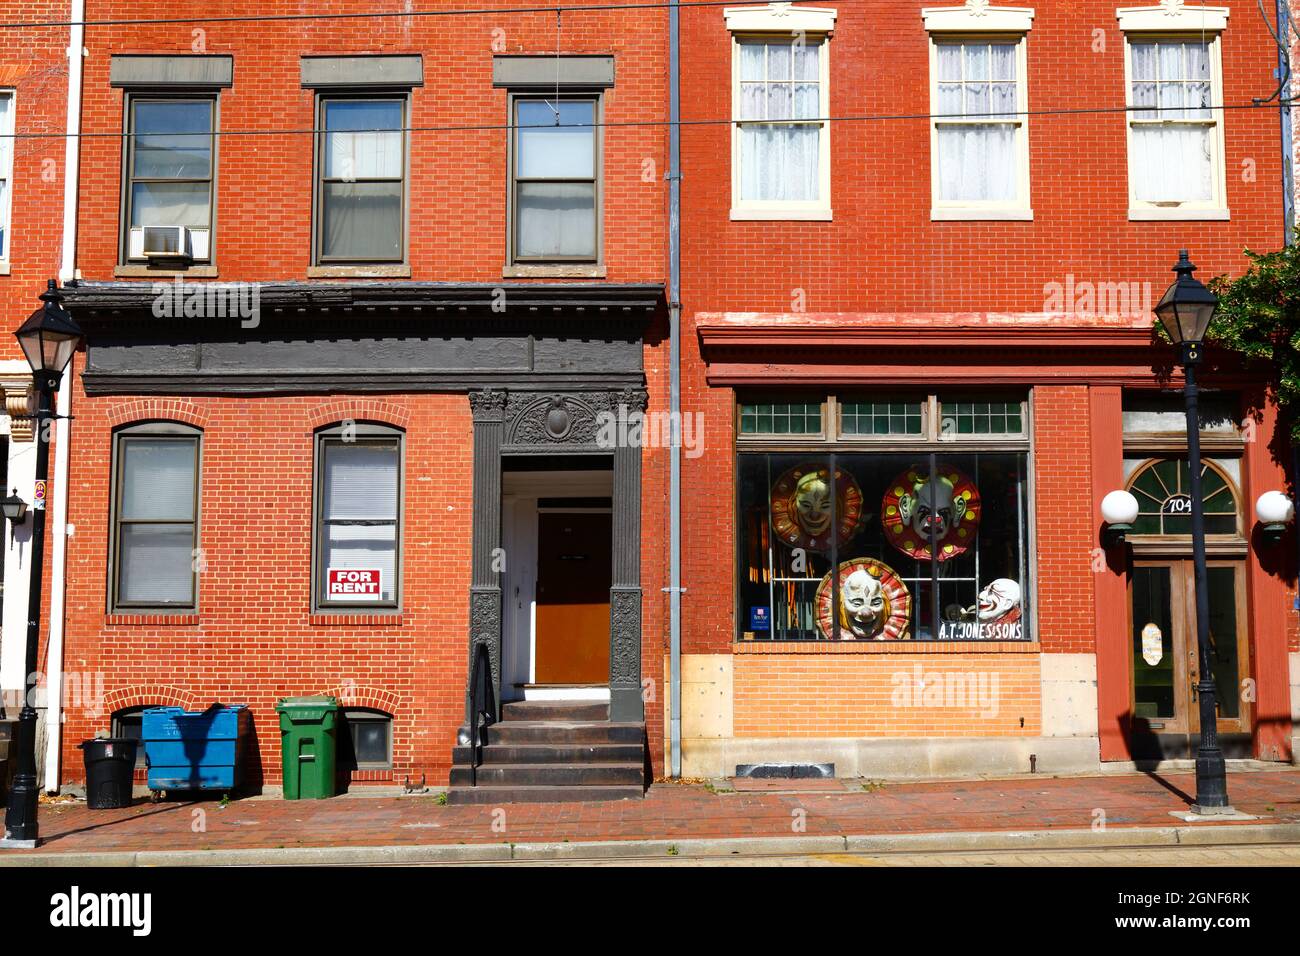 Facade of A.T. Jones & Sons costume shop, N Howard St, Baltimore, Maryland, USA Stock Photo